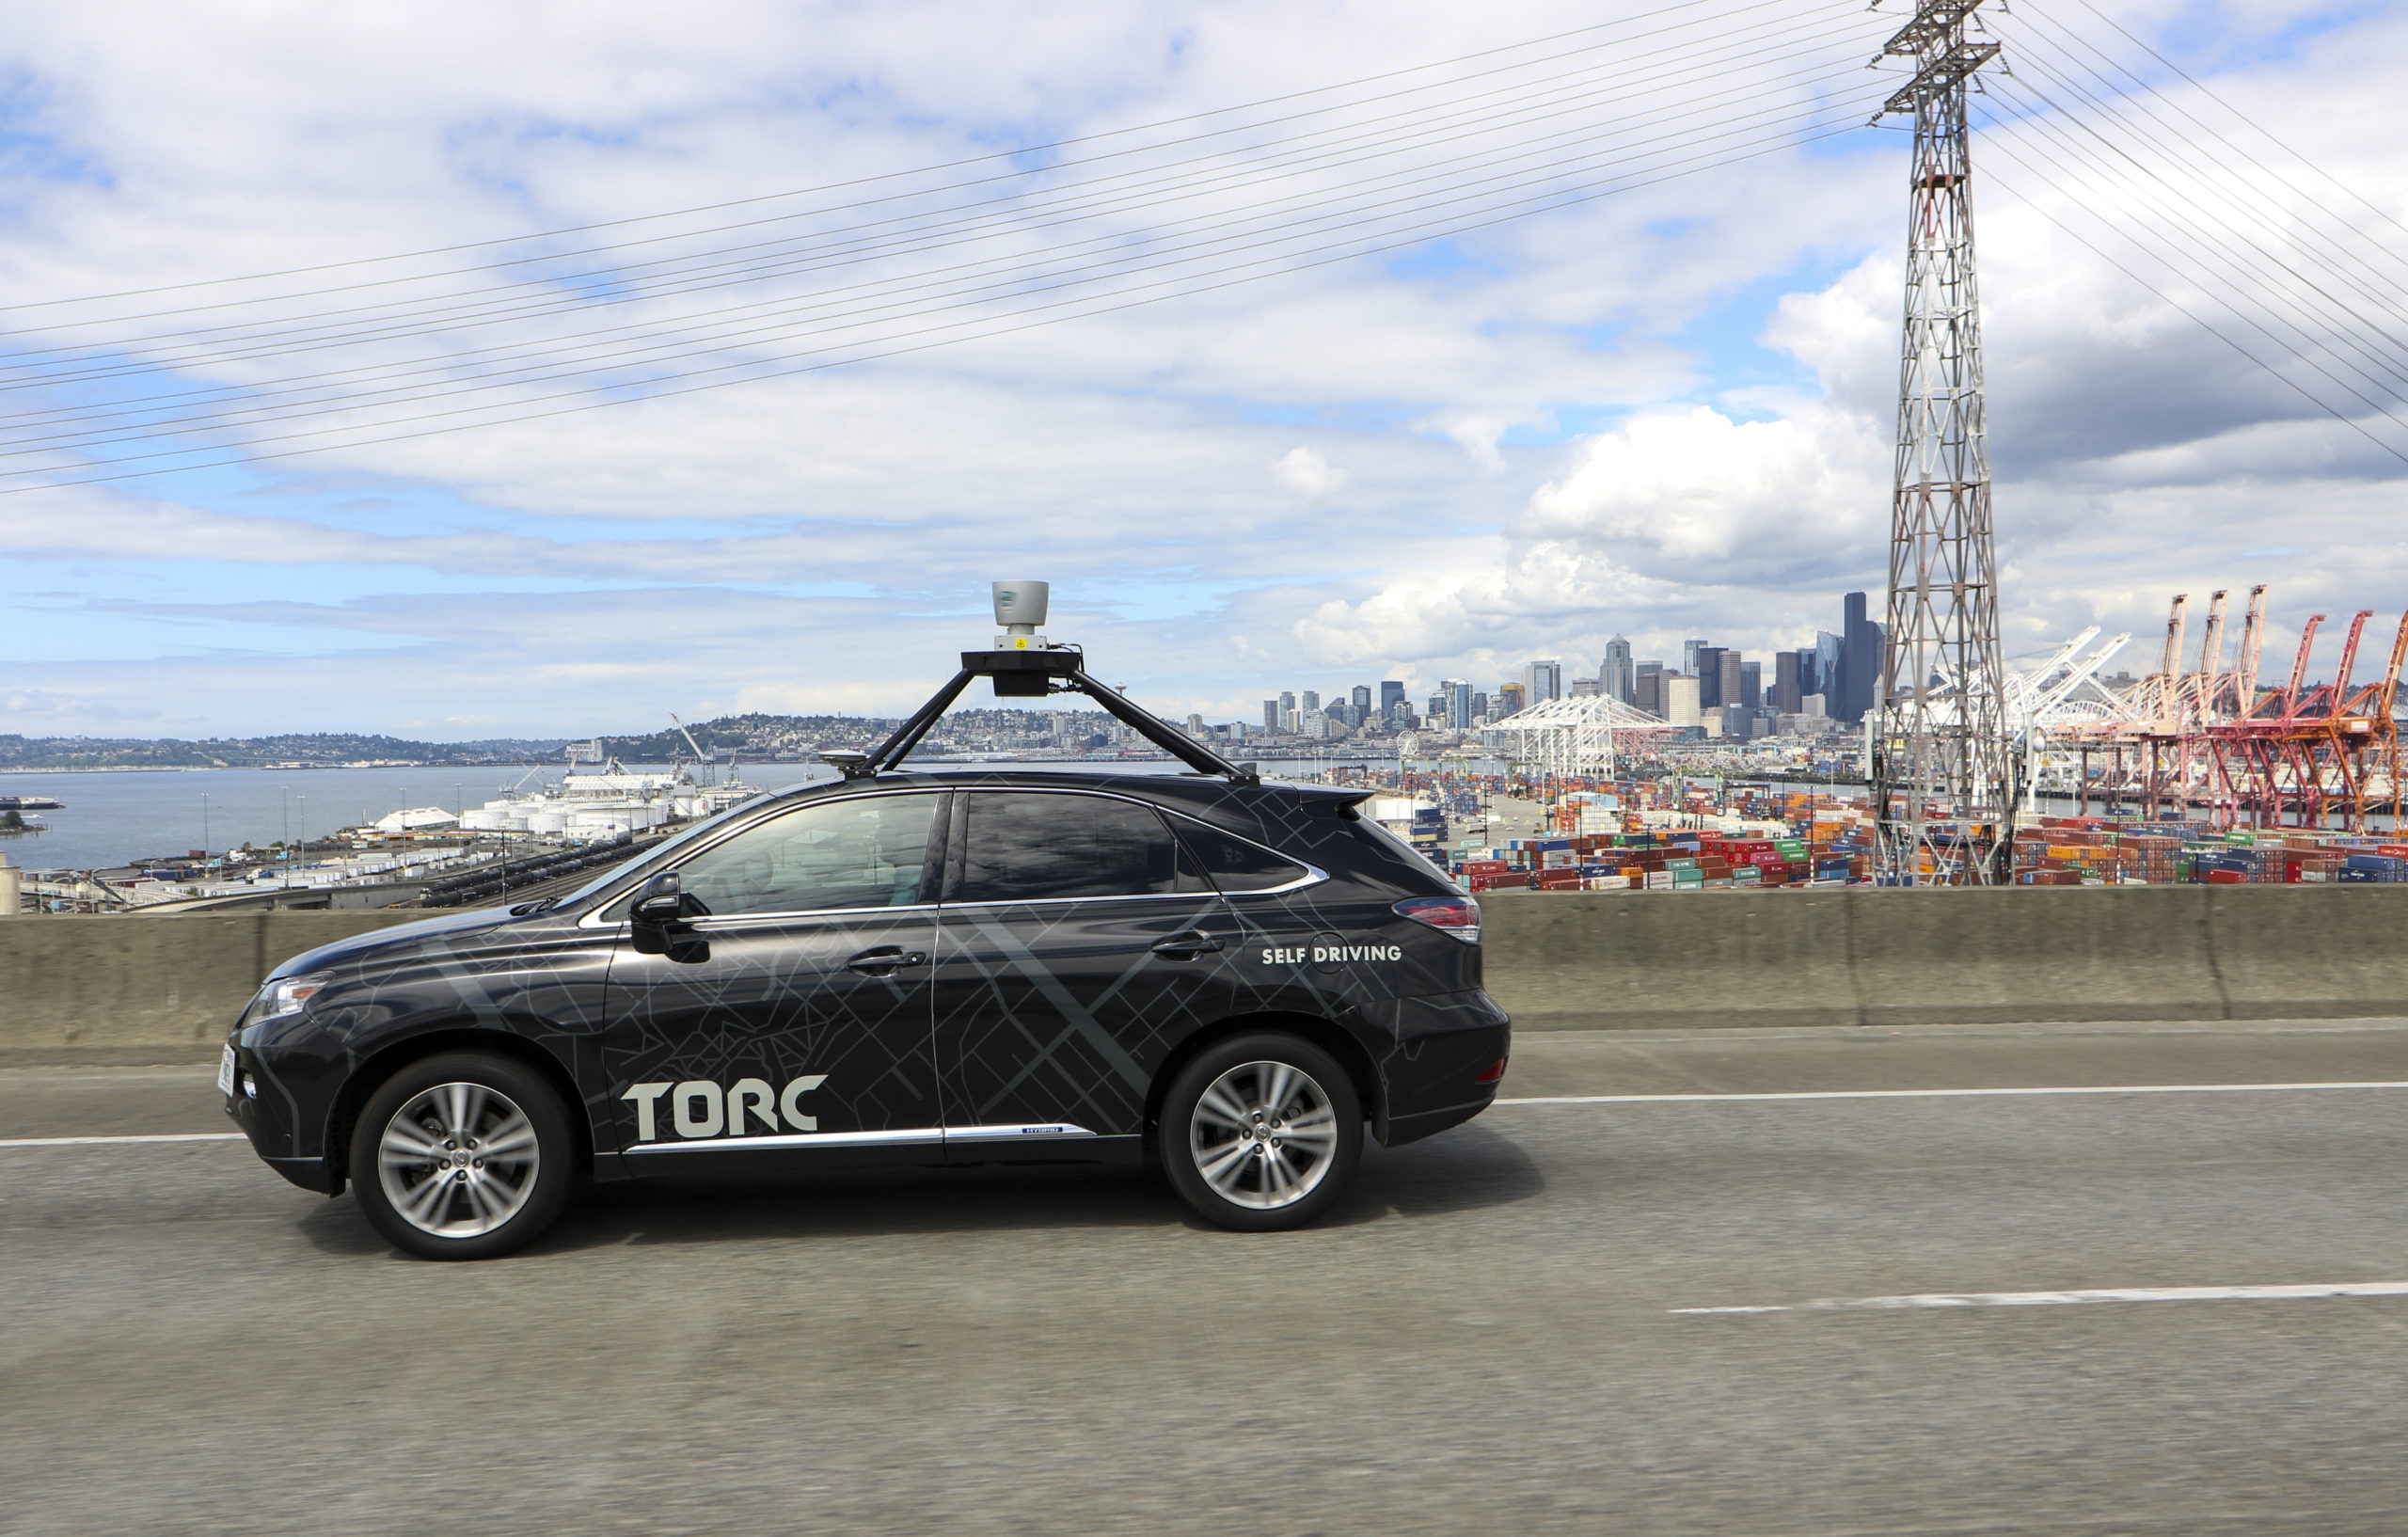 Torc vehicle driving in Seattle.